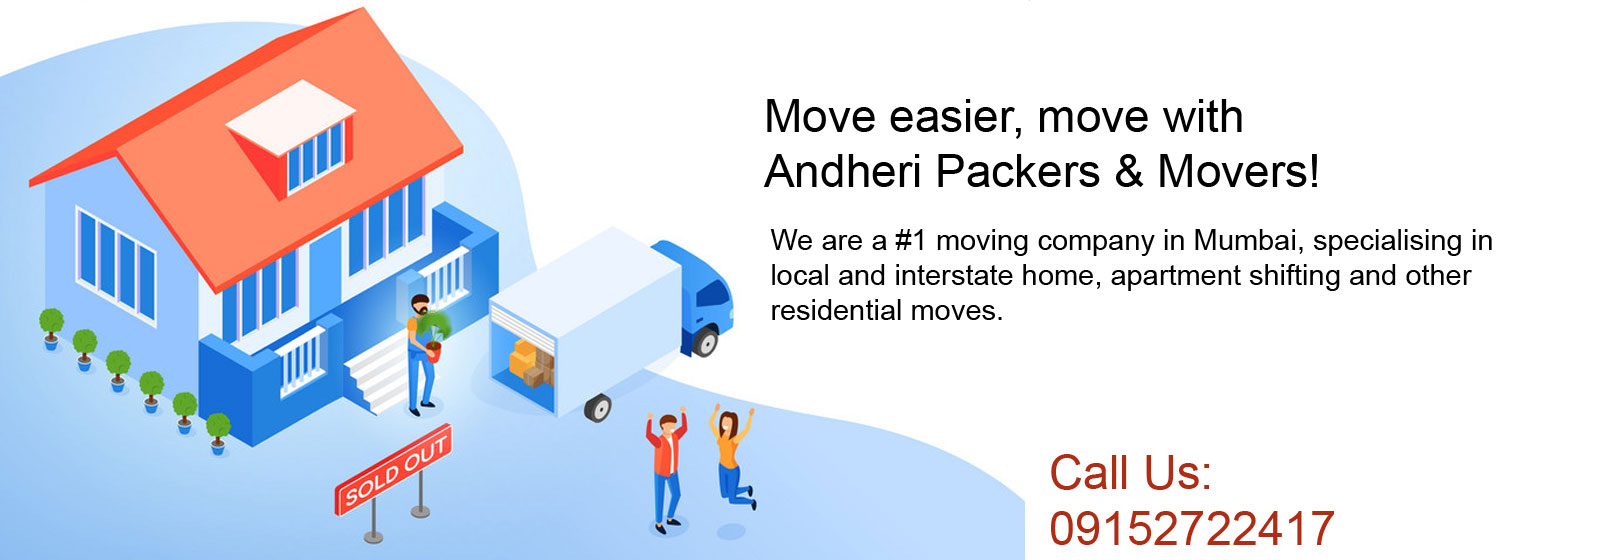 Andheri Packers And Movers